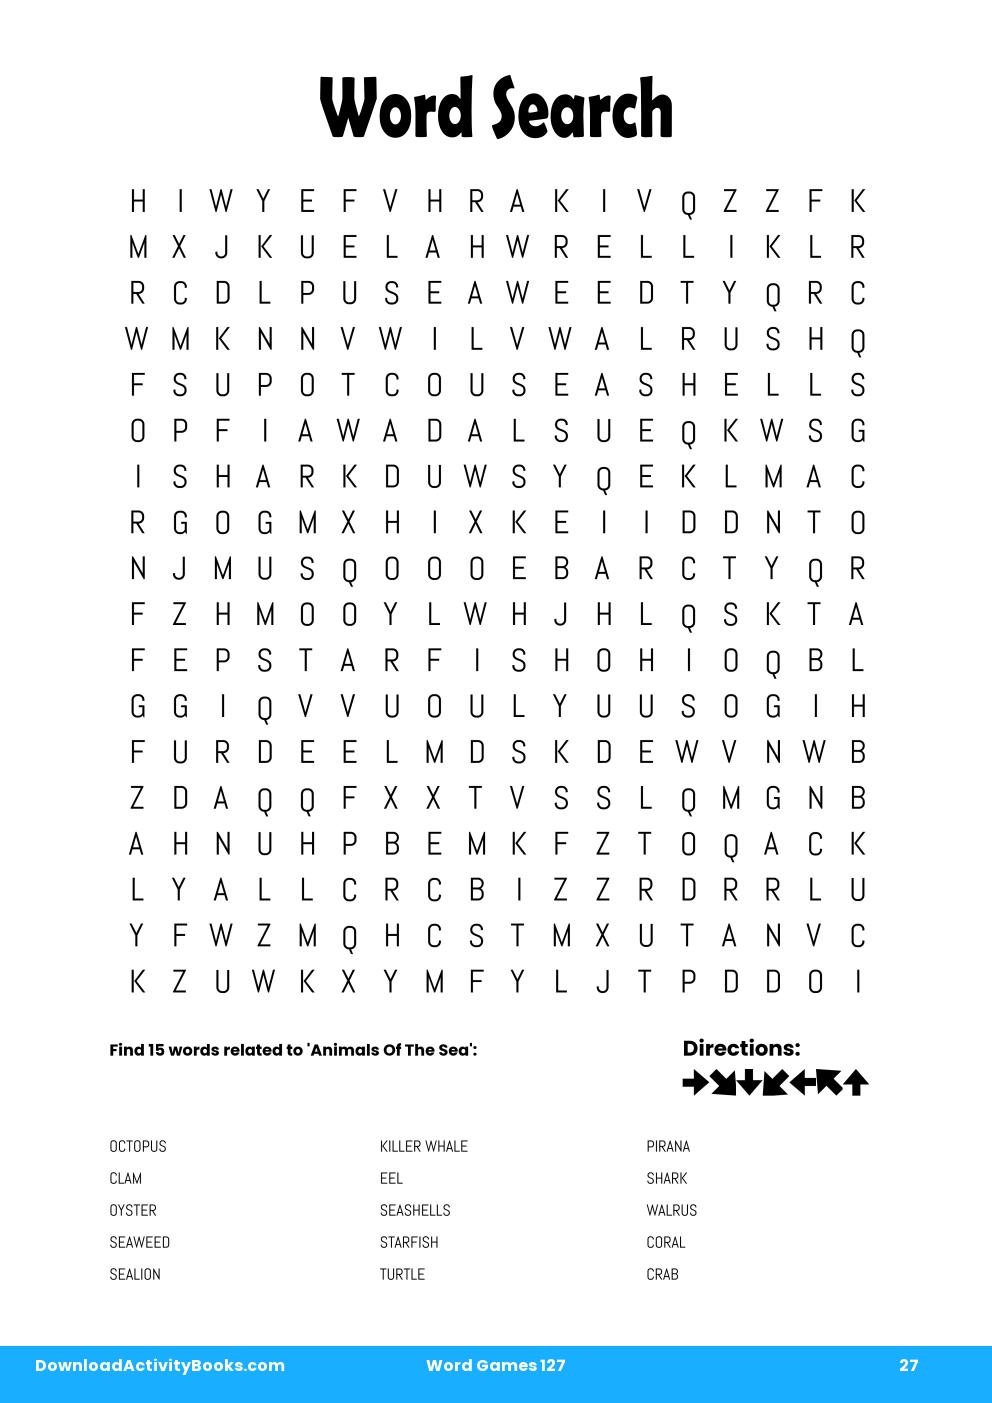 Word Search in Word Games 127